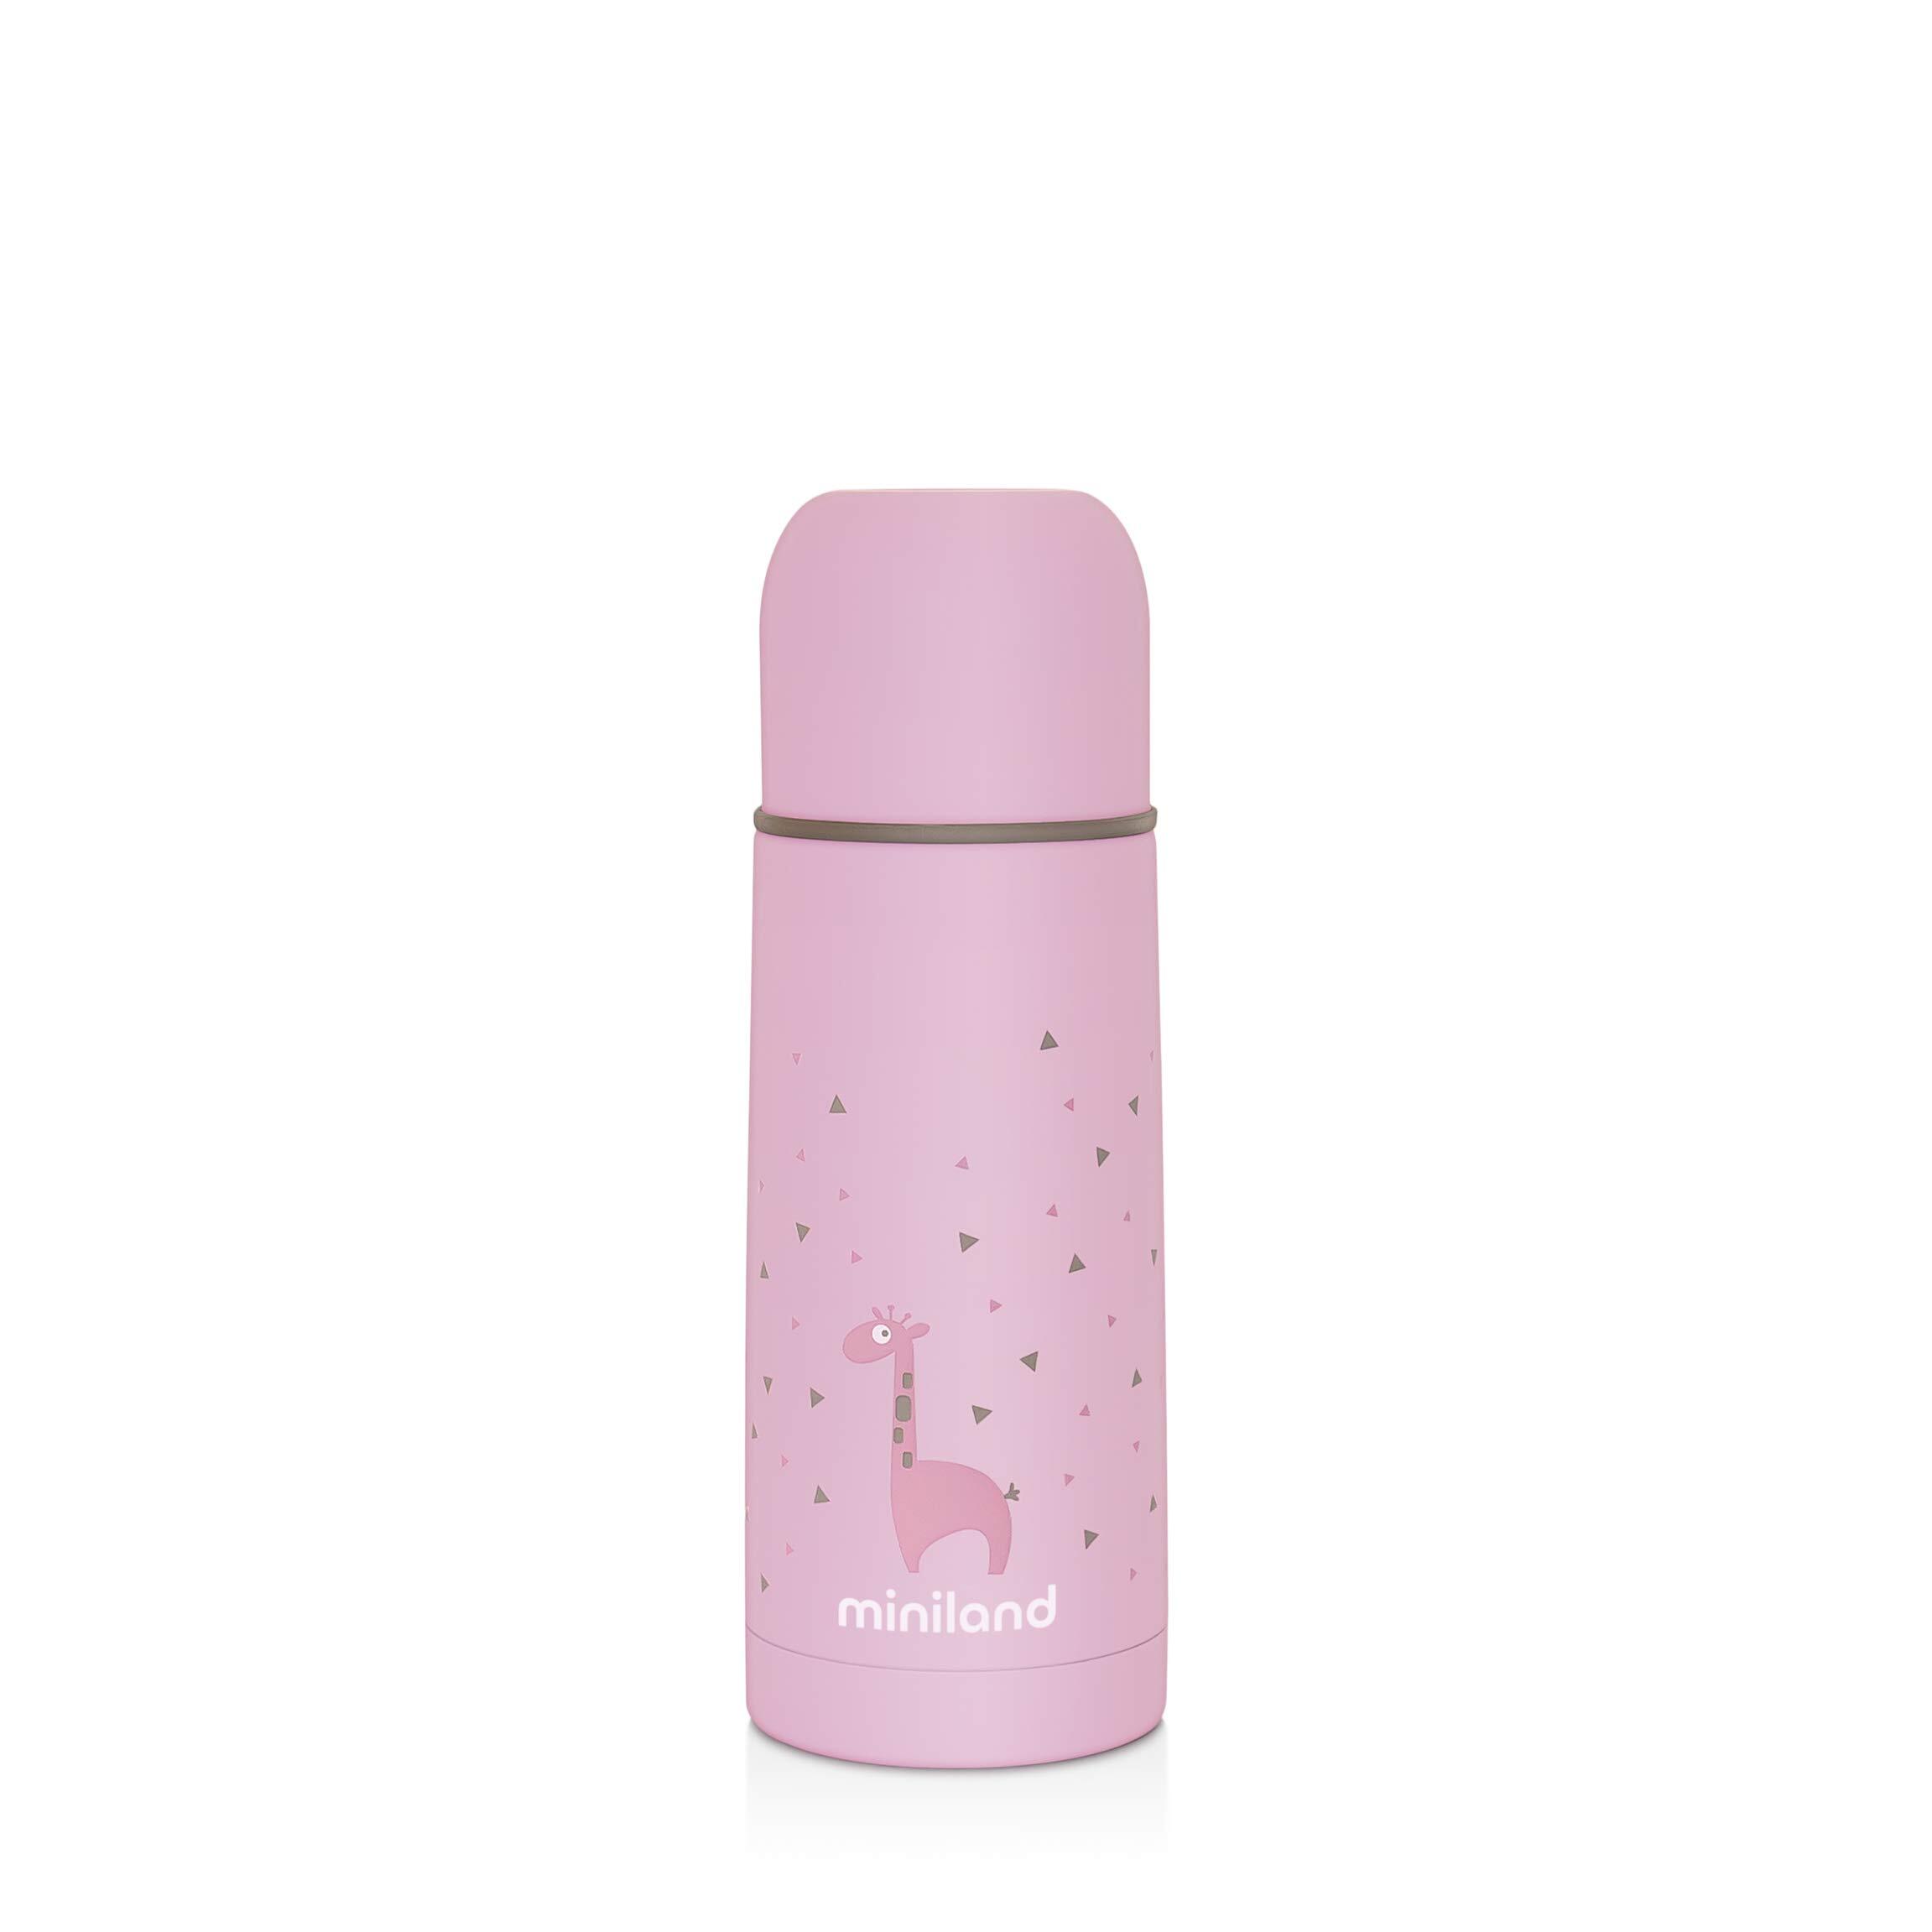 Miniland Silky food Thermo container pink 350ml